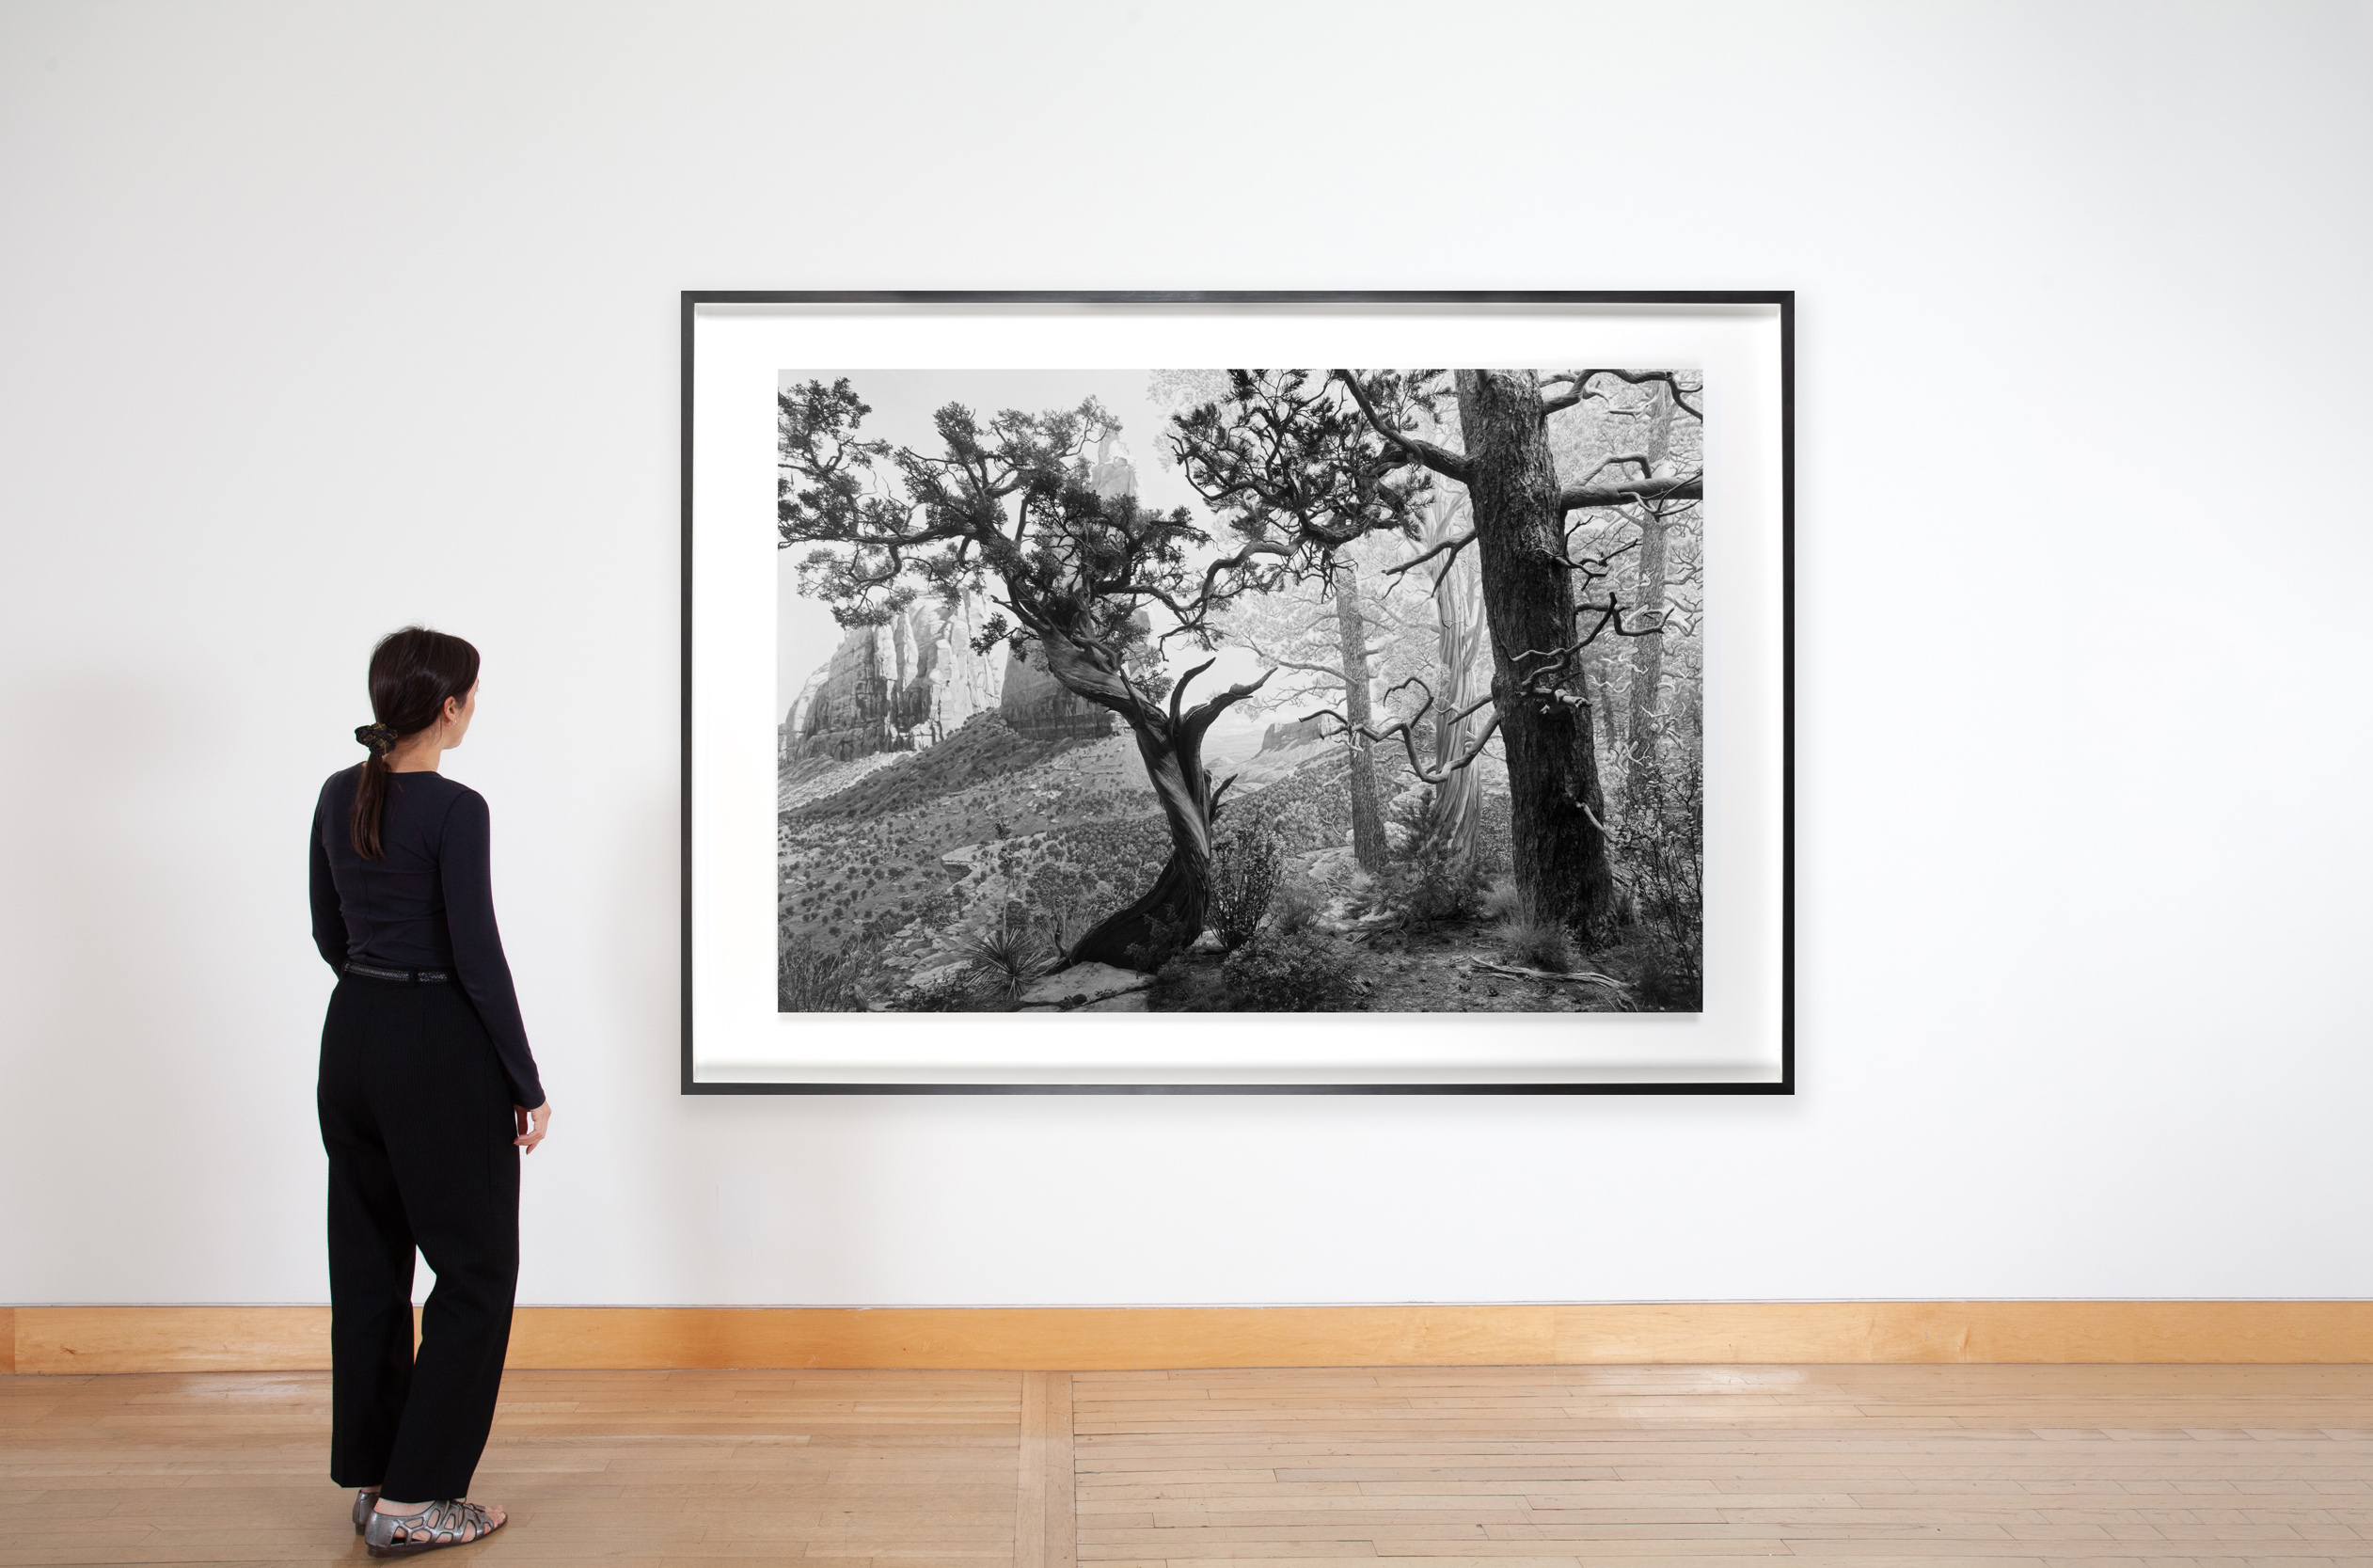 Image of a figure looking at a black and white photograph of dramatically lit gnarled trees with rock edifices in the background.